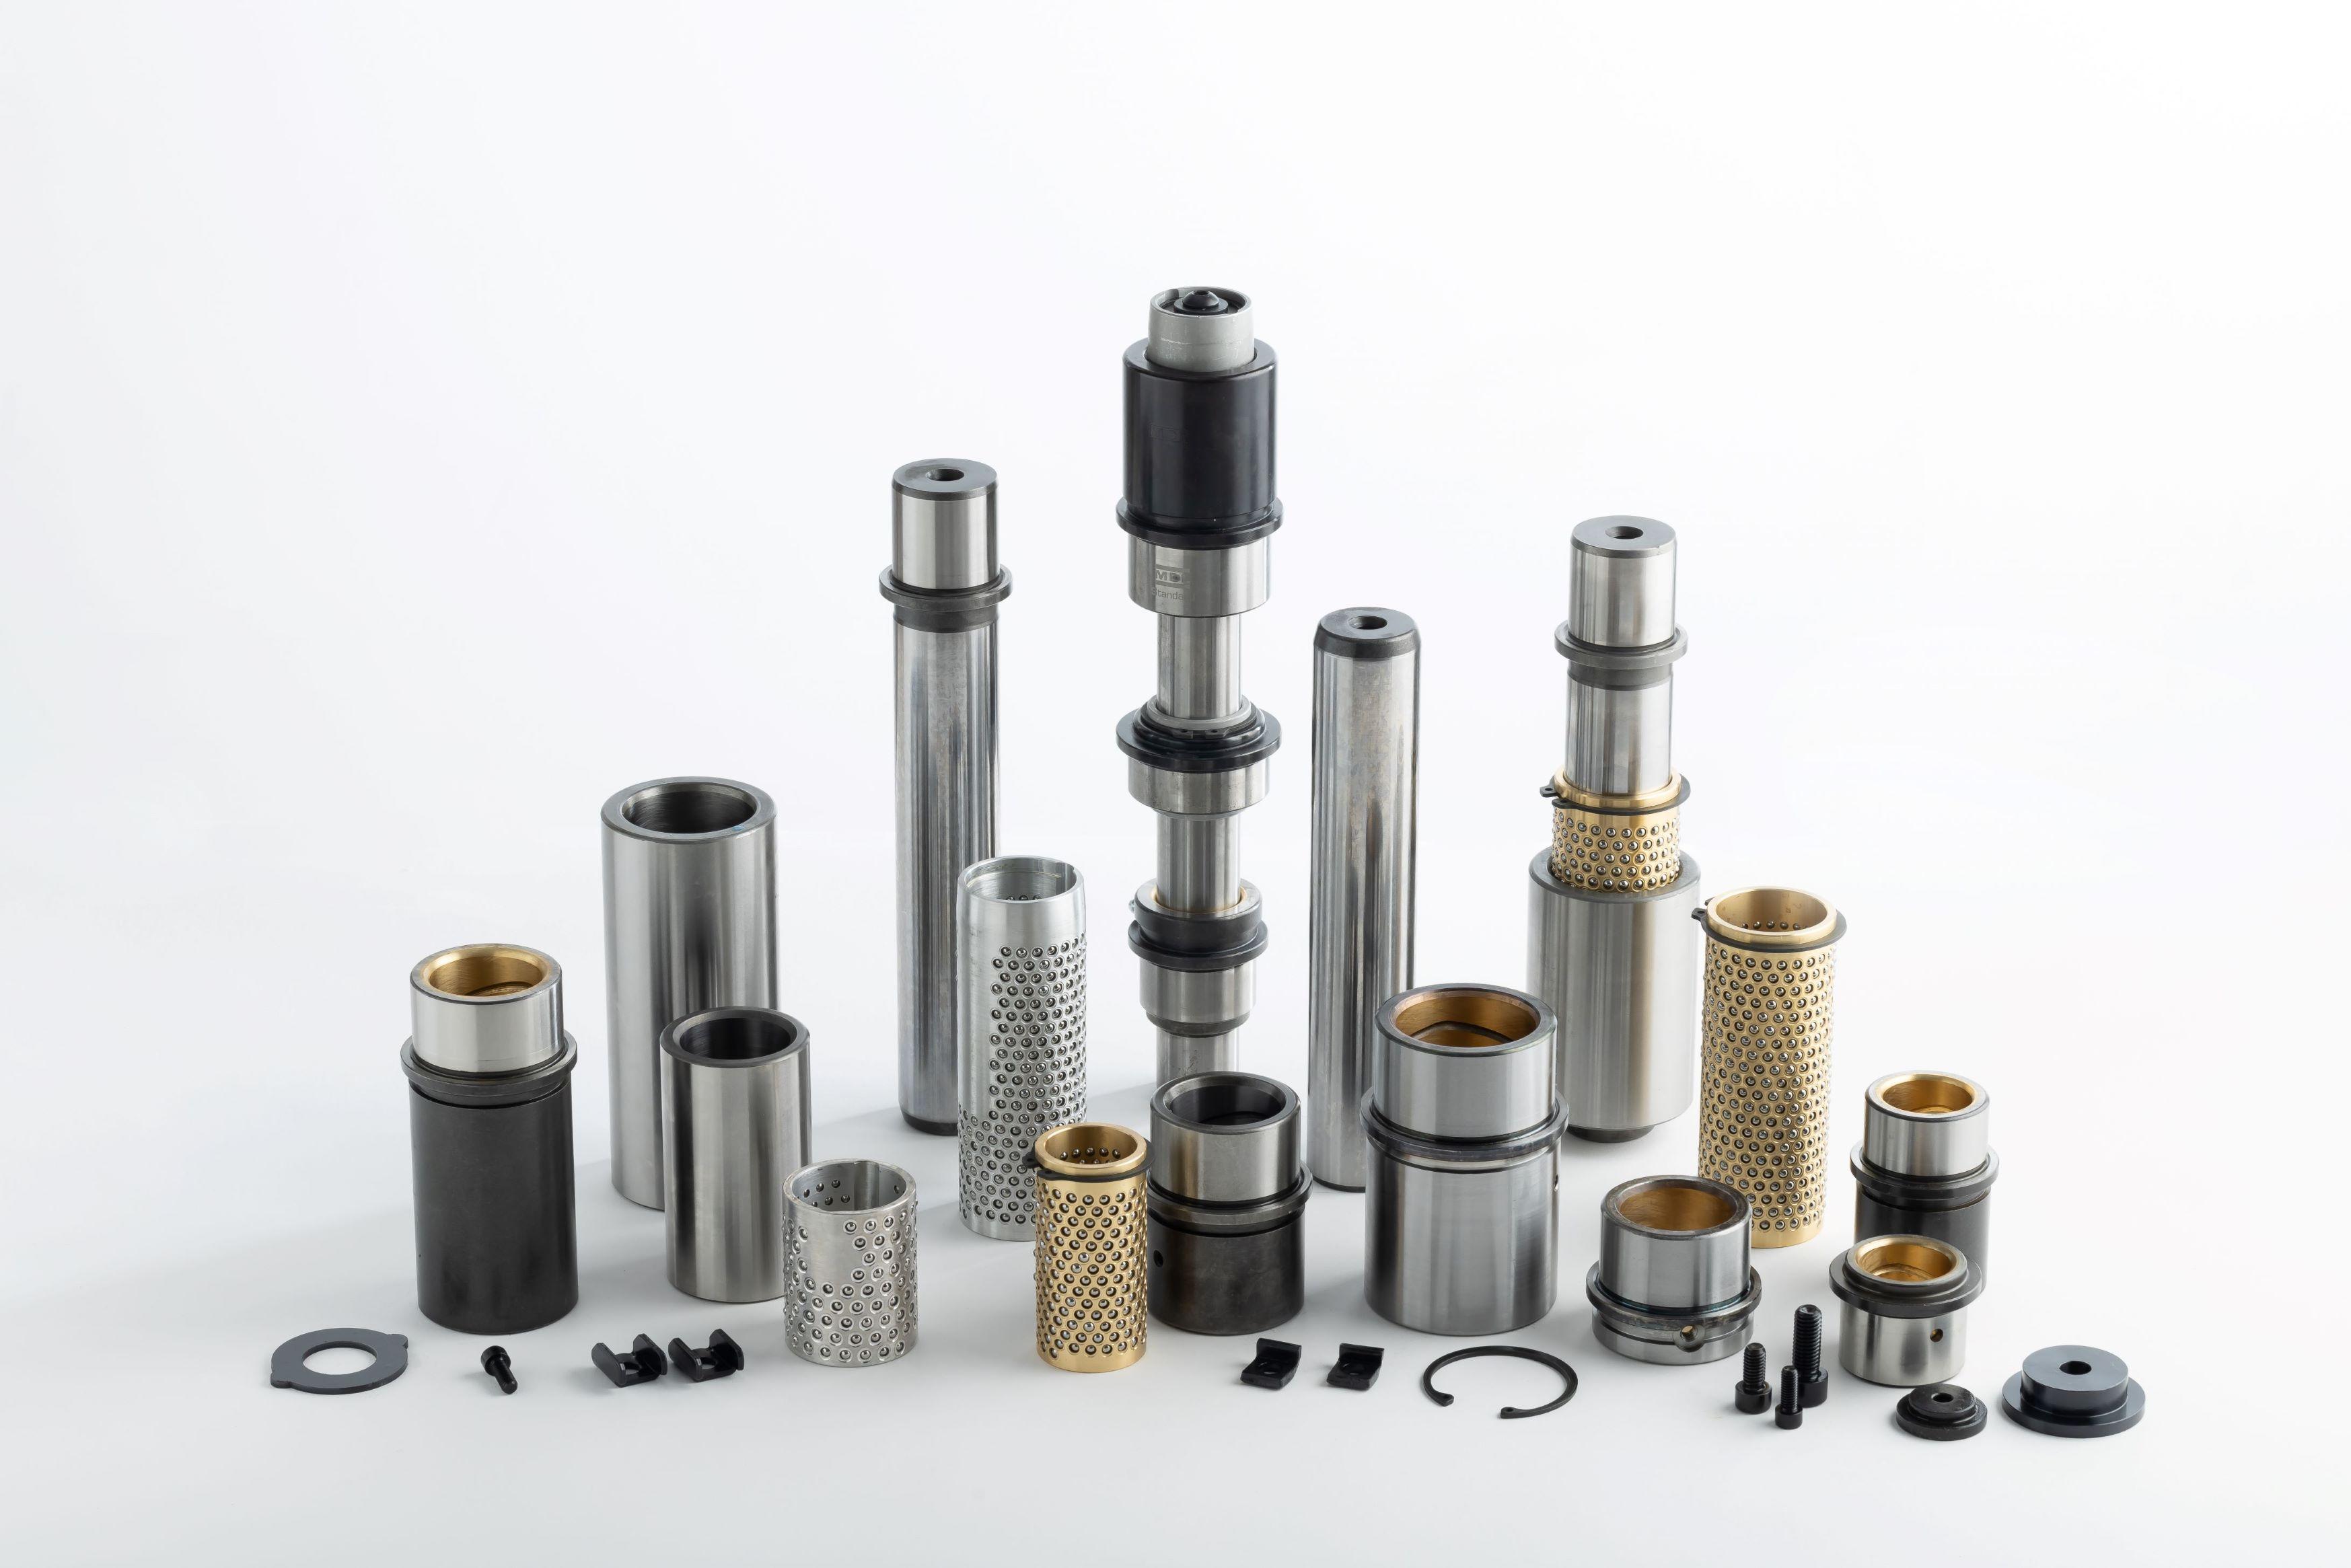 standardized guiding elements for die sets making MDL components by AMDL